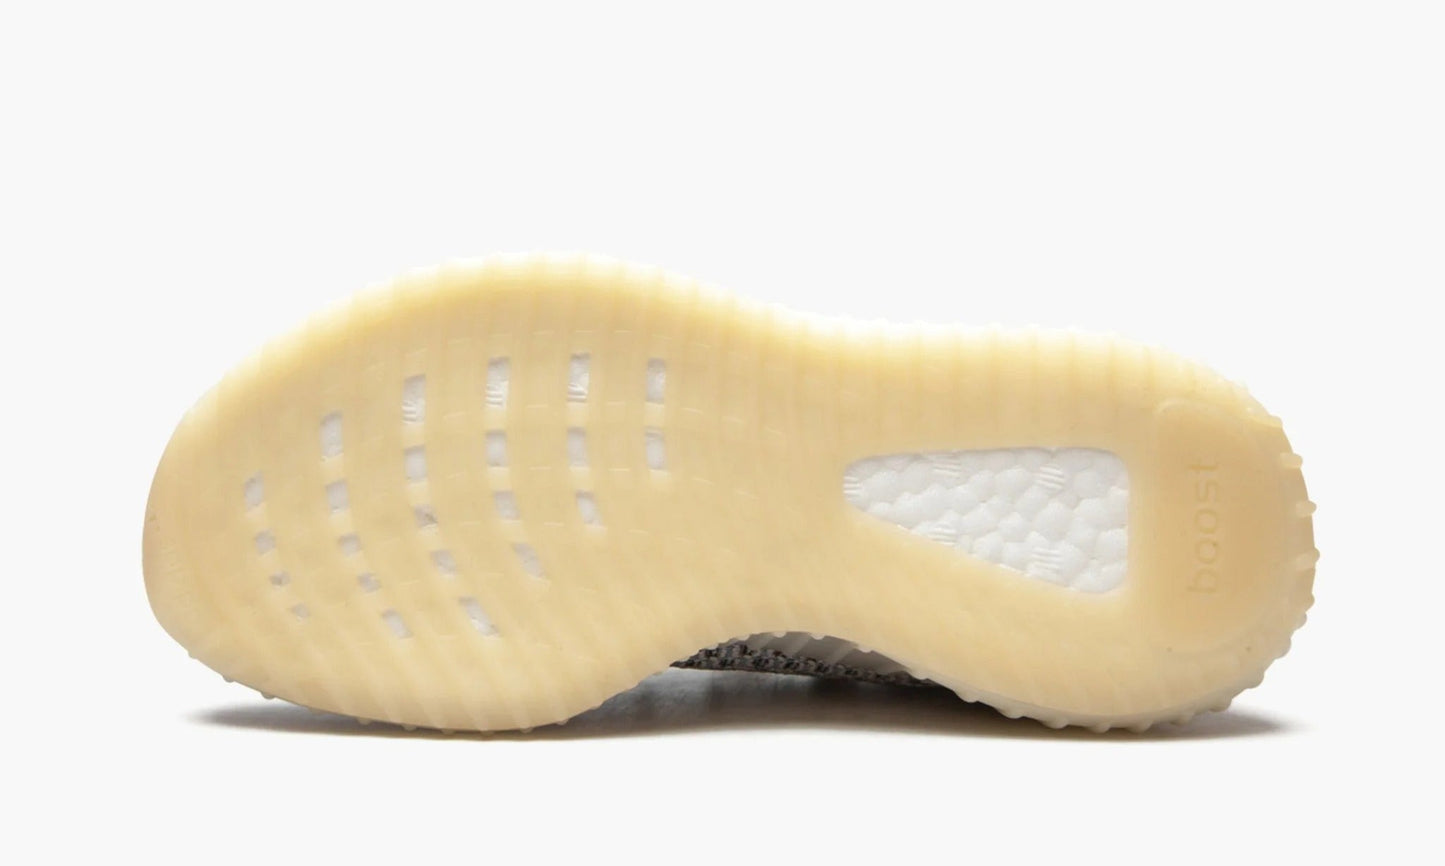 Yeezy Boost 350 Kids "Ash Pearl" - GY7659 | The Sortage